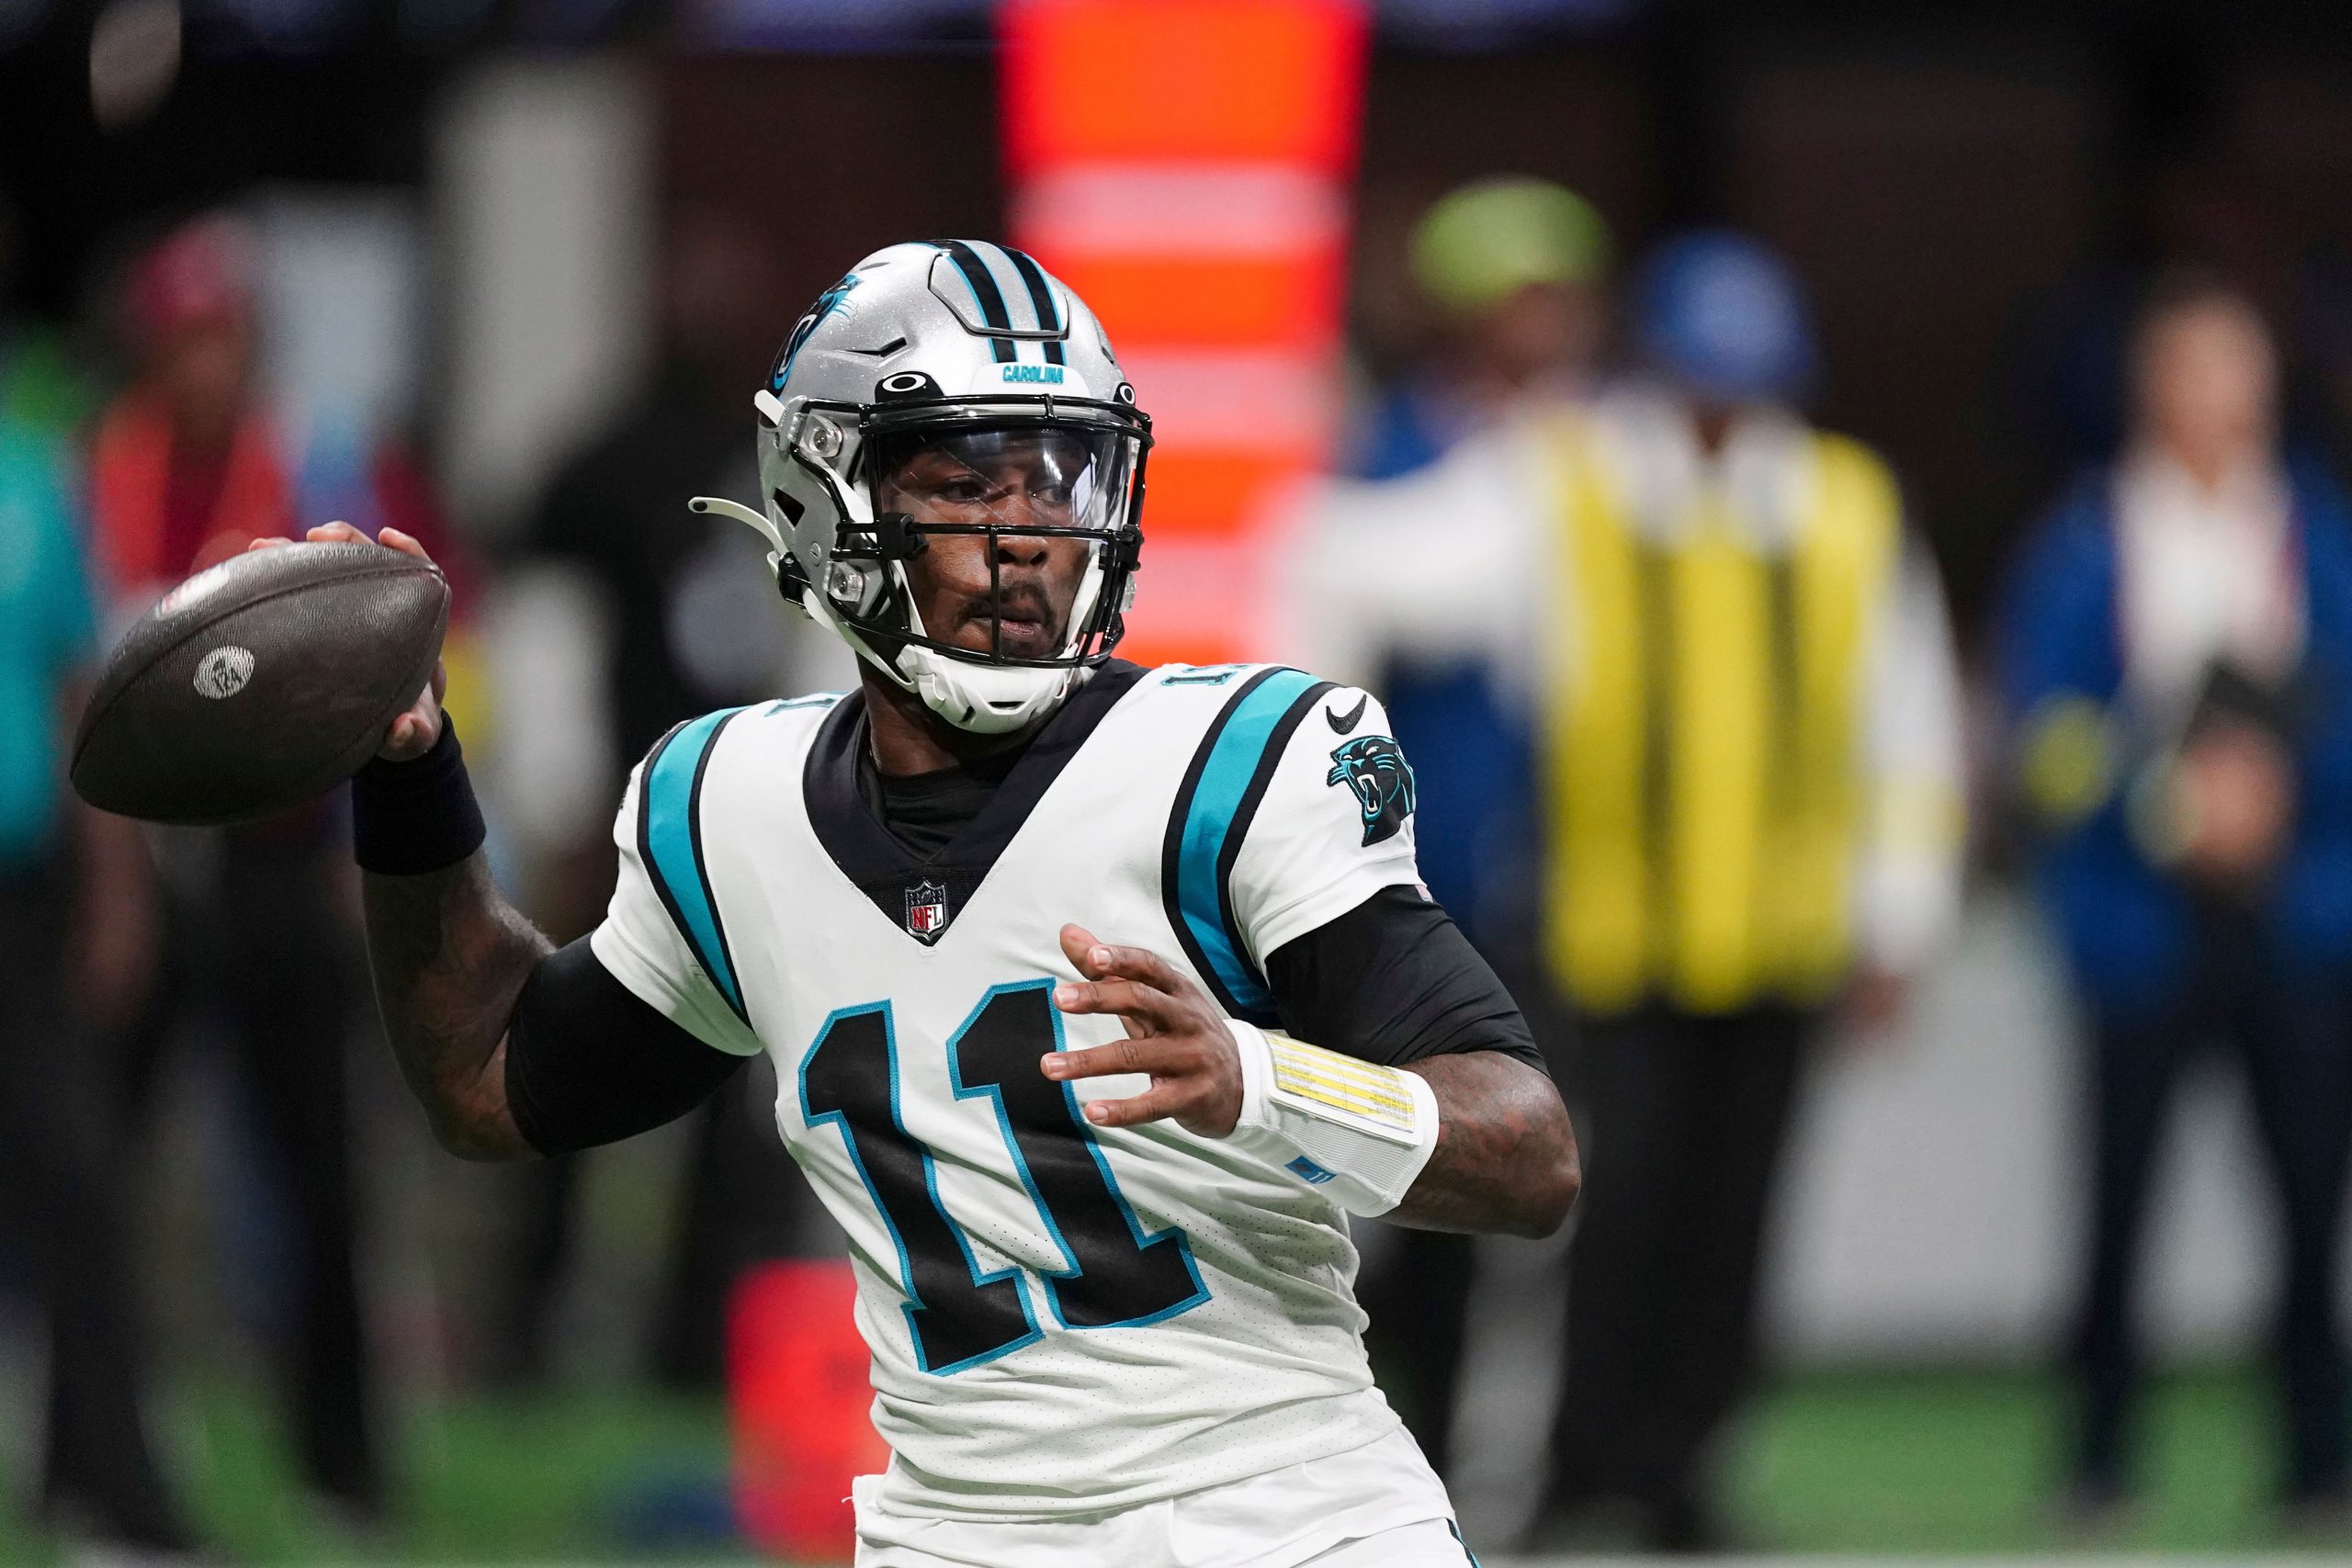 NFL 2022: Carolina Panthers to continue with PJ Walker as starting QB against Cincinnati Bengals in Week 9